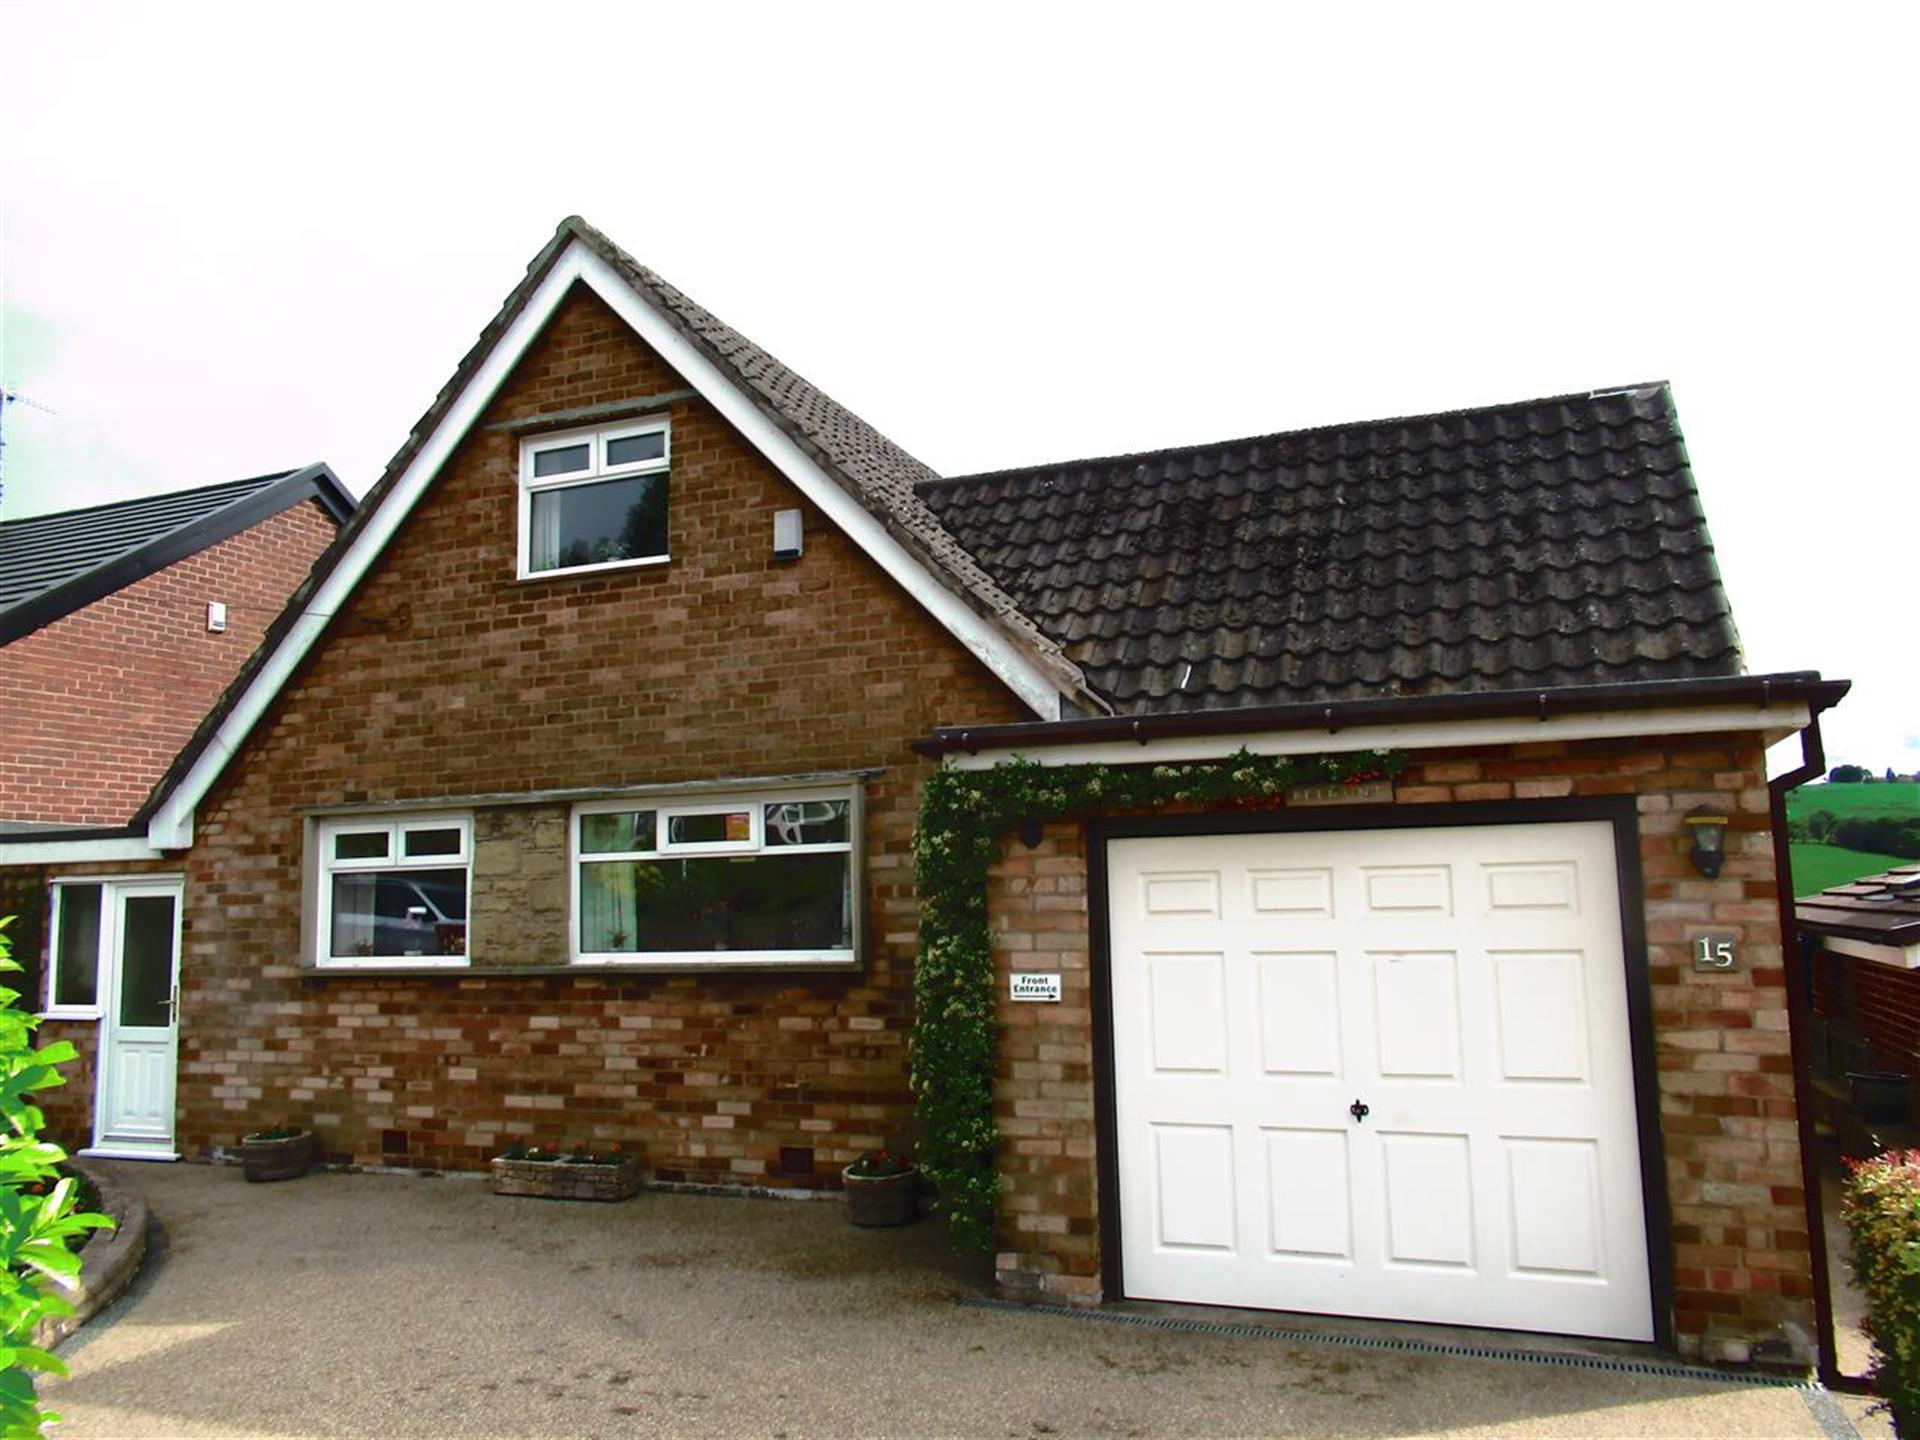 3 Bedroom Detached House For Sale - Main Picture